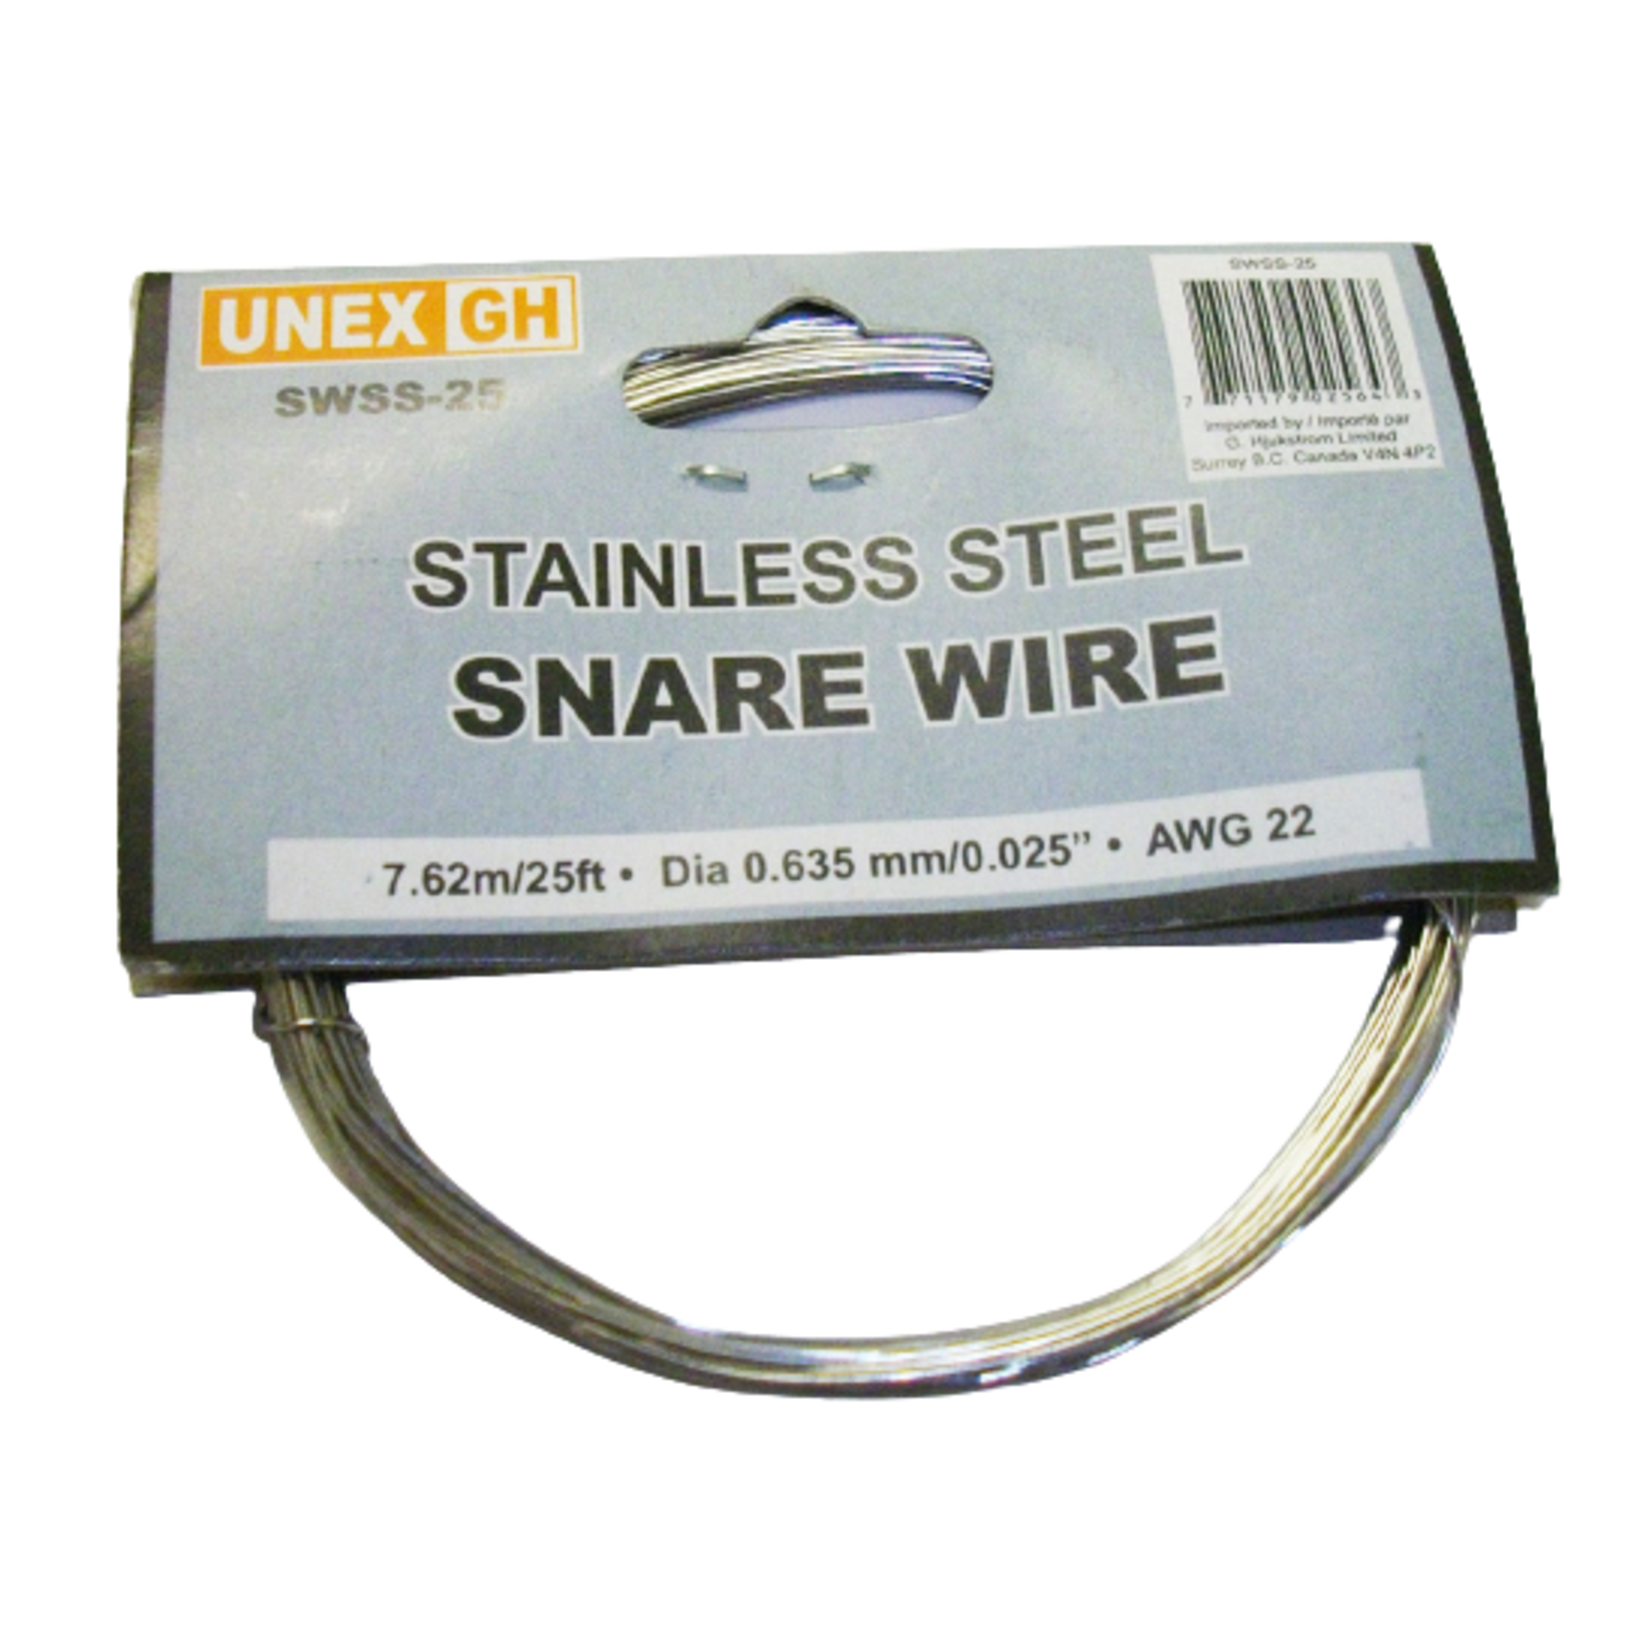 STAINLESS STEEL SNARE WIRE 25FT